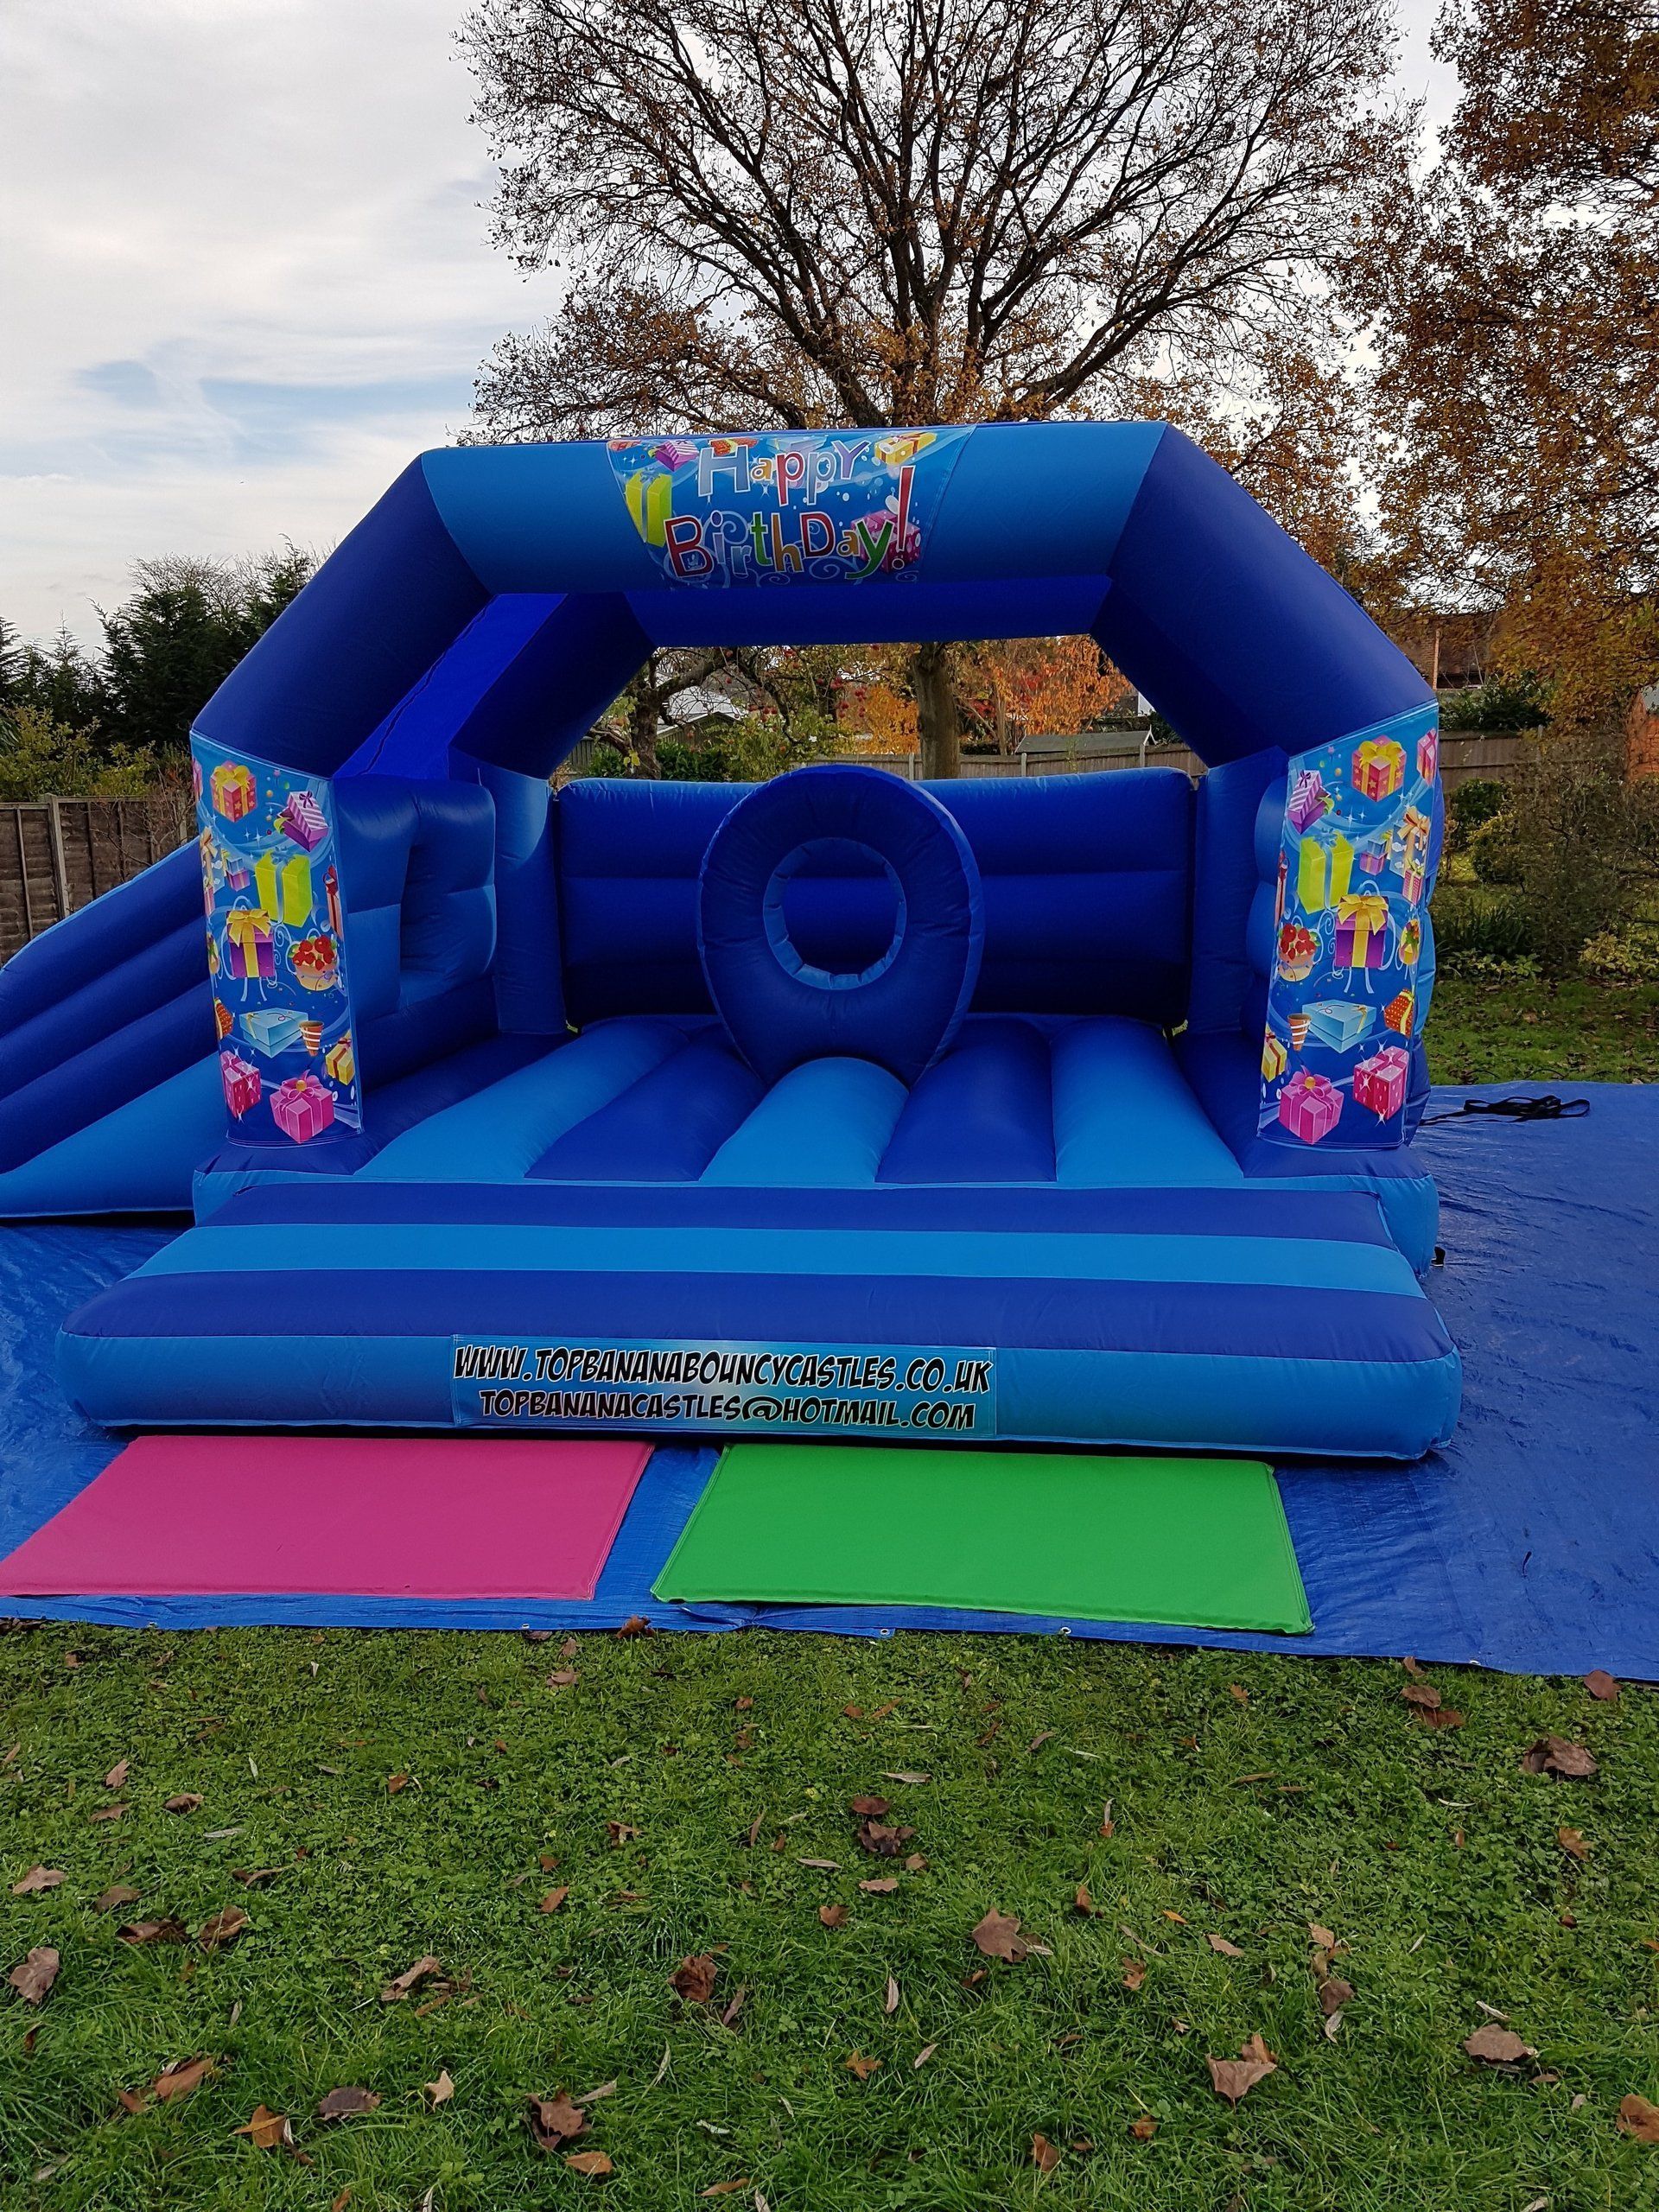 large bouncy castle with birthday artwork